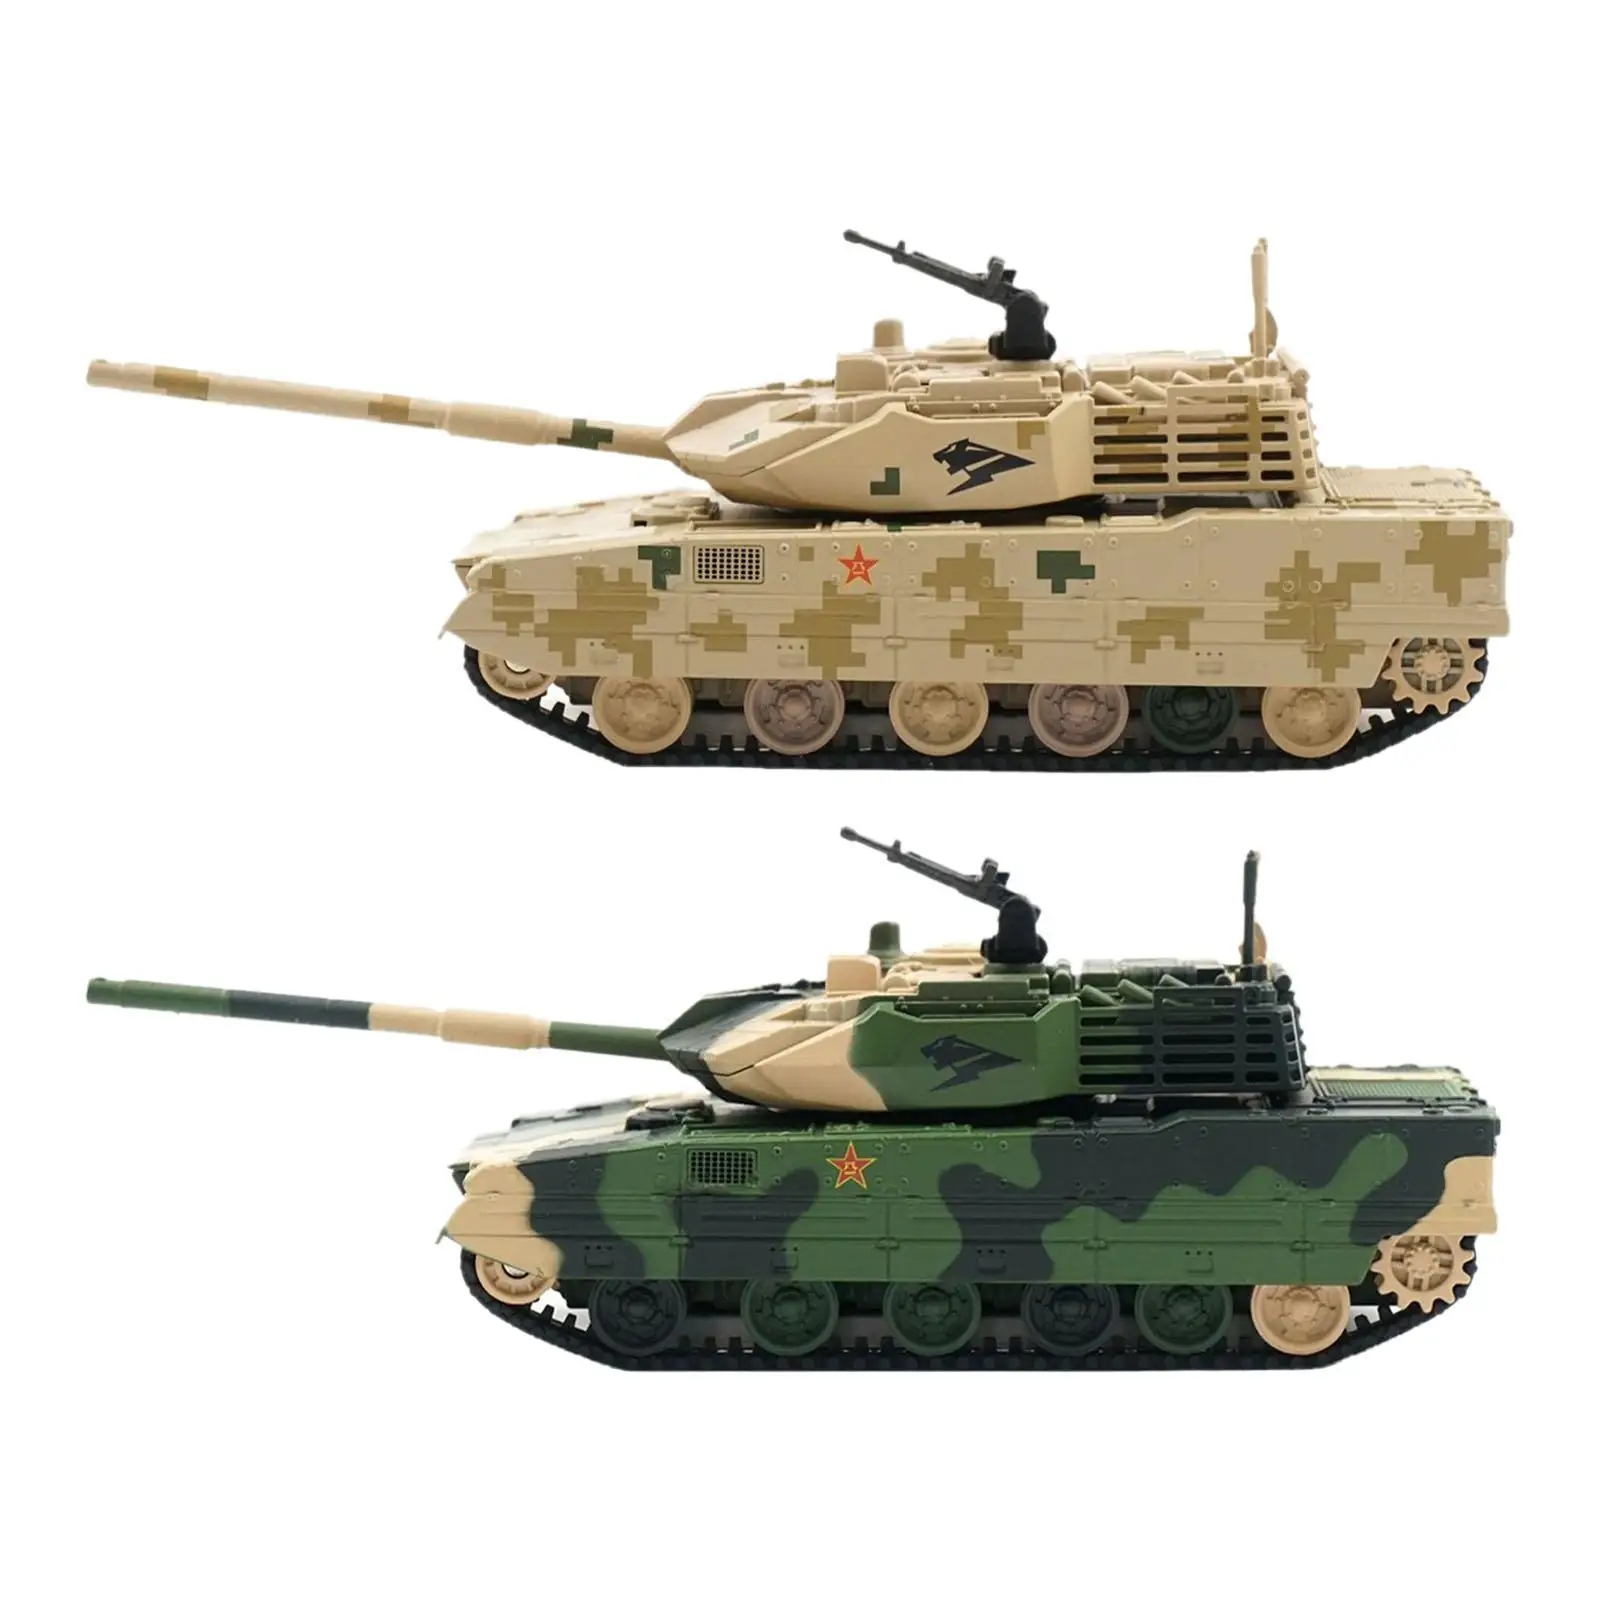 1:64 Scale Armored Light Tank Model for Children Tabletop Decor Collection